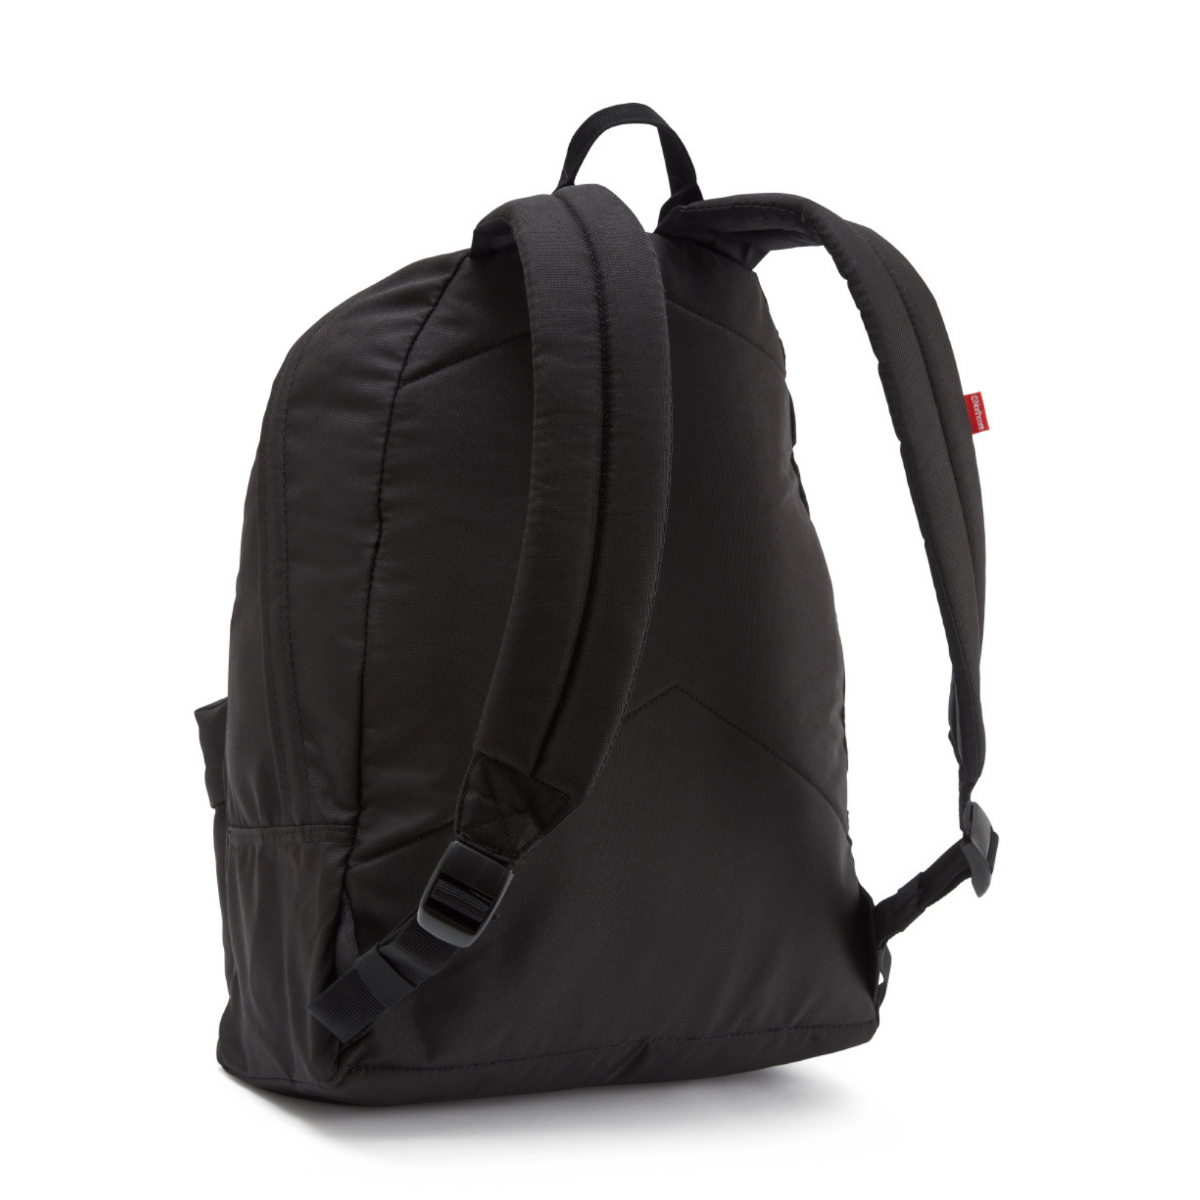 Northcore Essentials Backpack Black